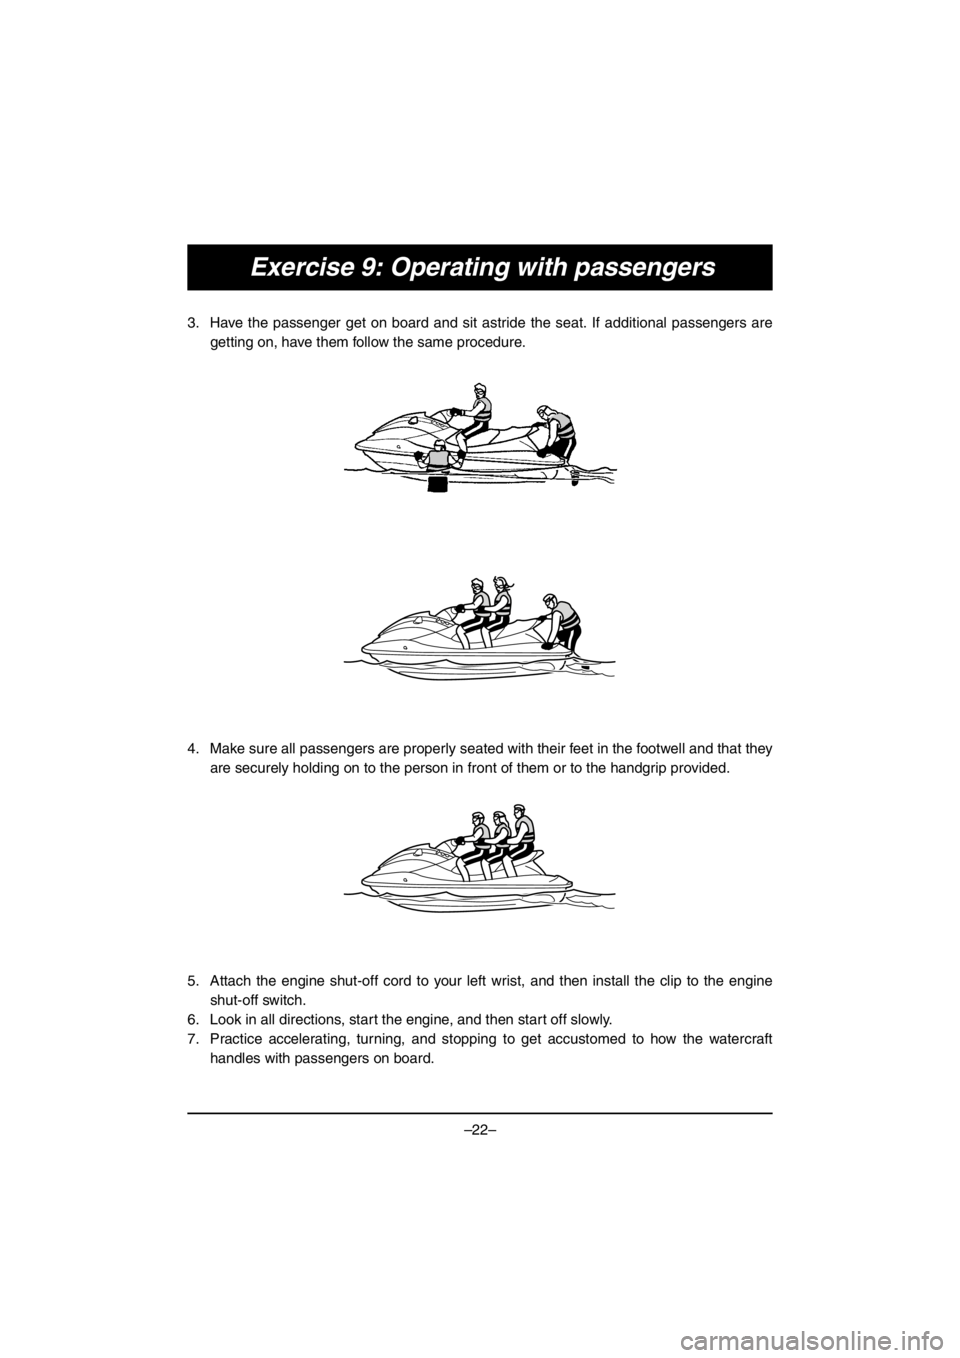 YAMAHA EX SPORT 2017  Manuale duso (in Italian) –22–
Exercise 9: Operating with passengers
3. Have the passenger get on board and sit astride the seat. If additional passengers are
getting on, have them follow the same procedure. 
4. Make sure 